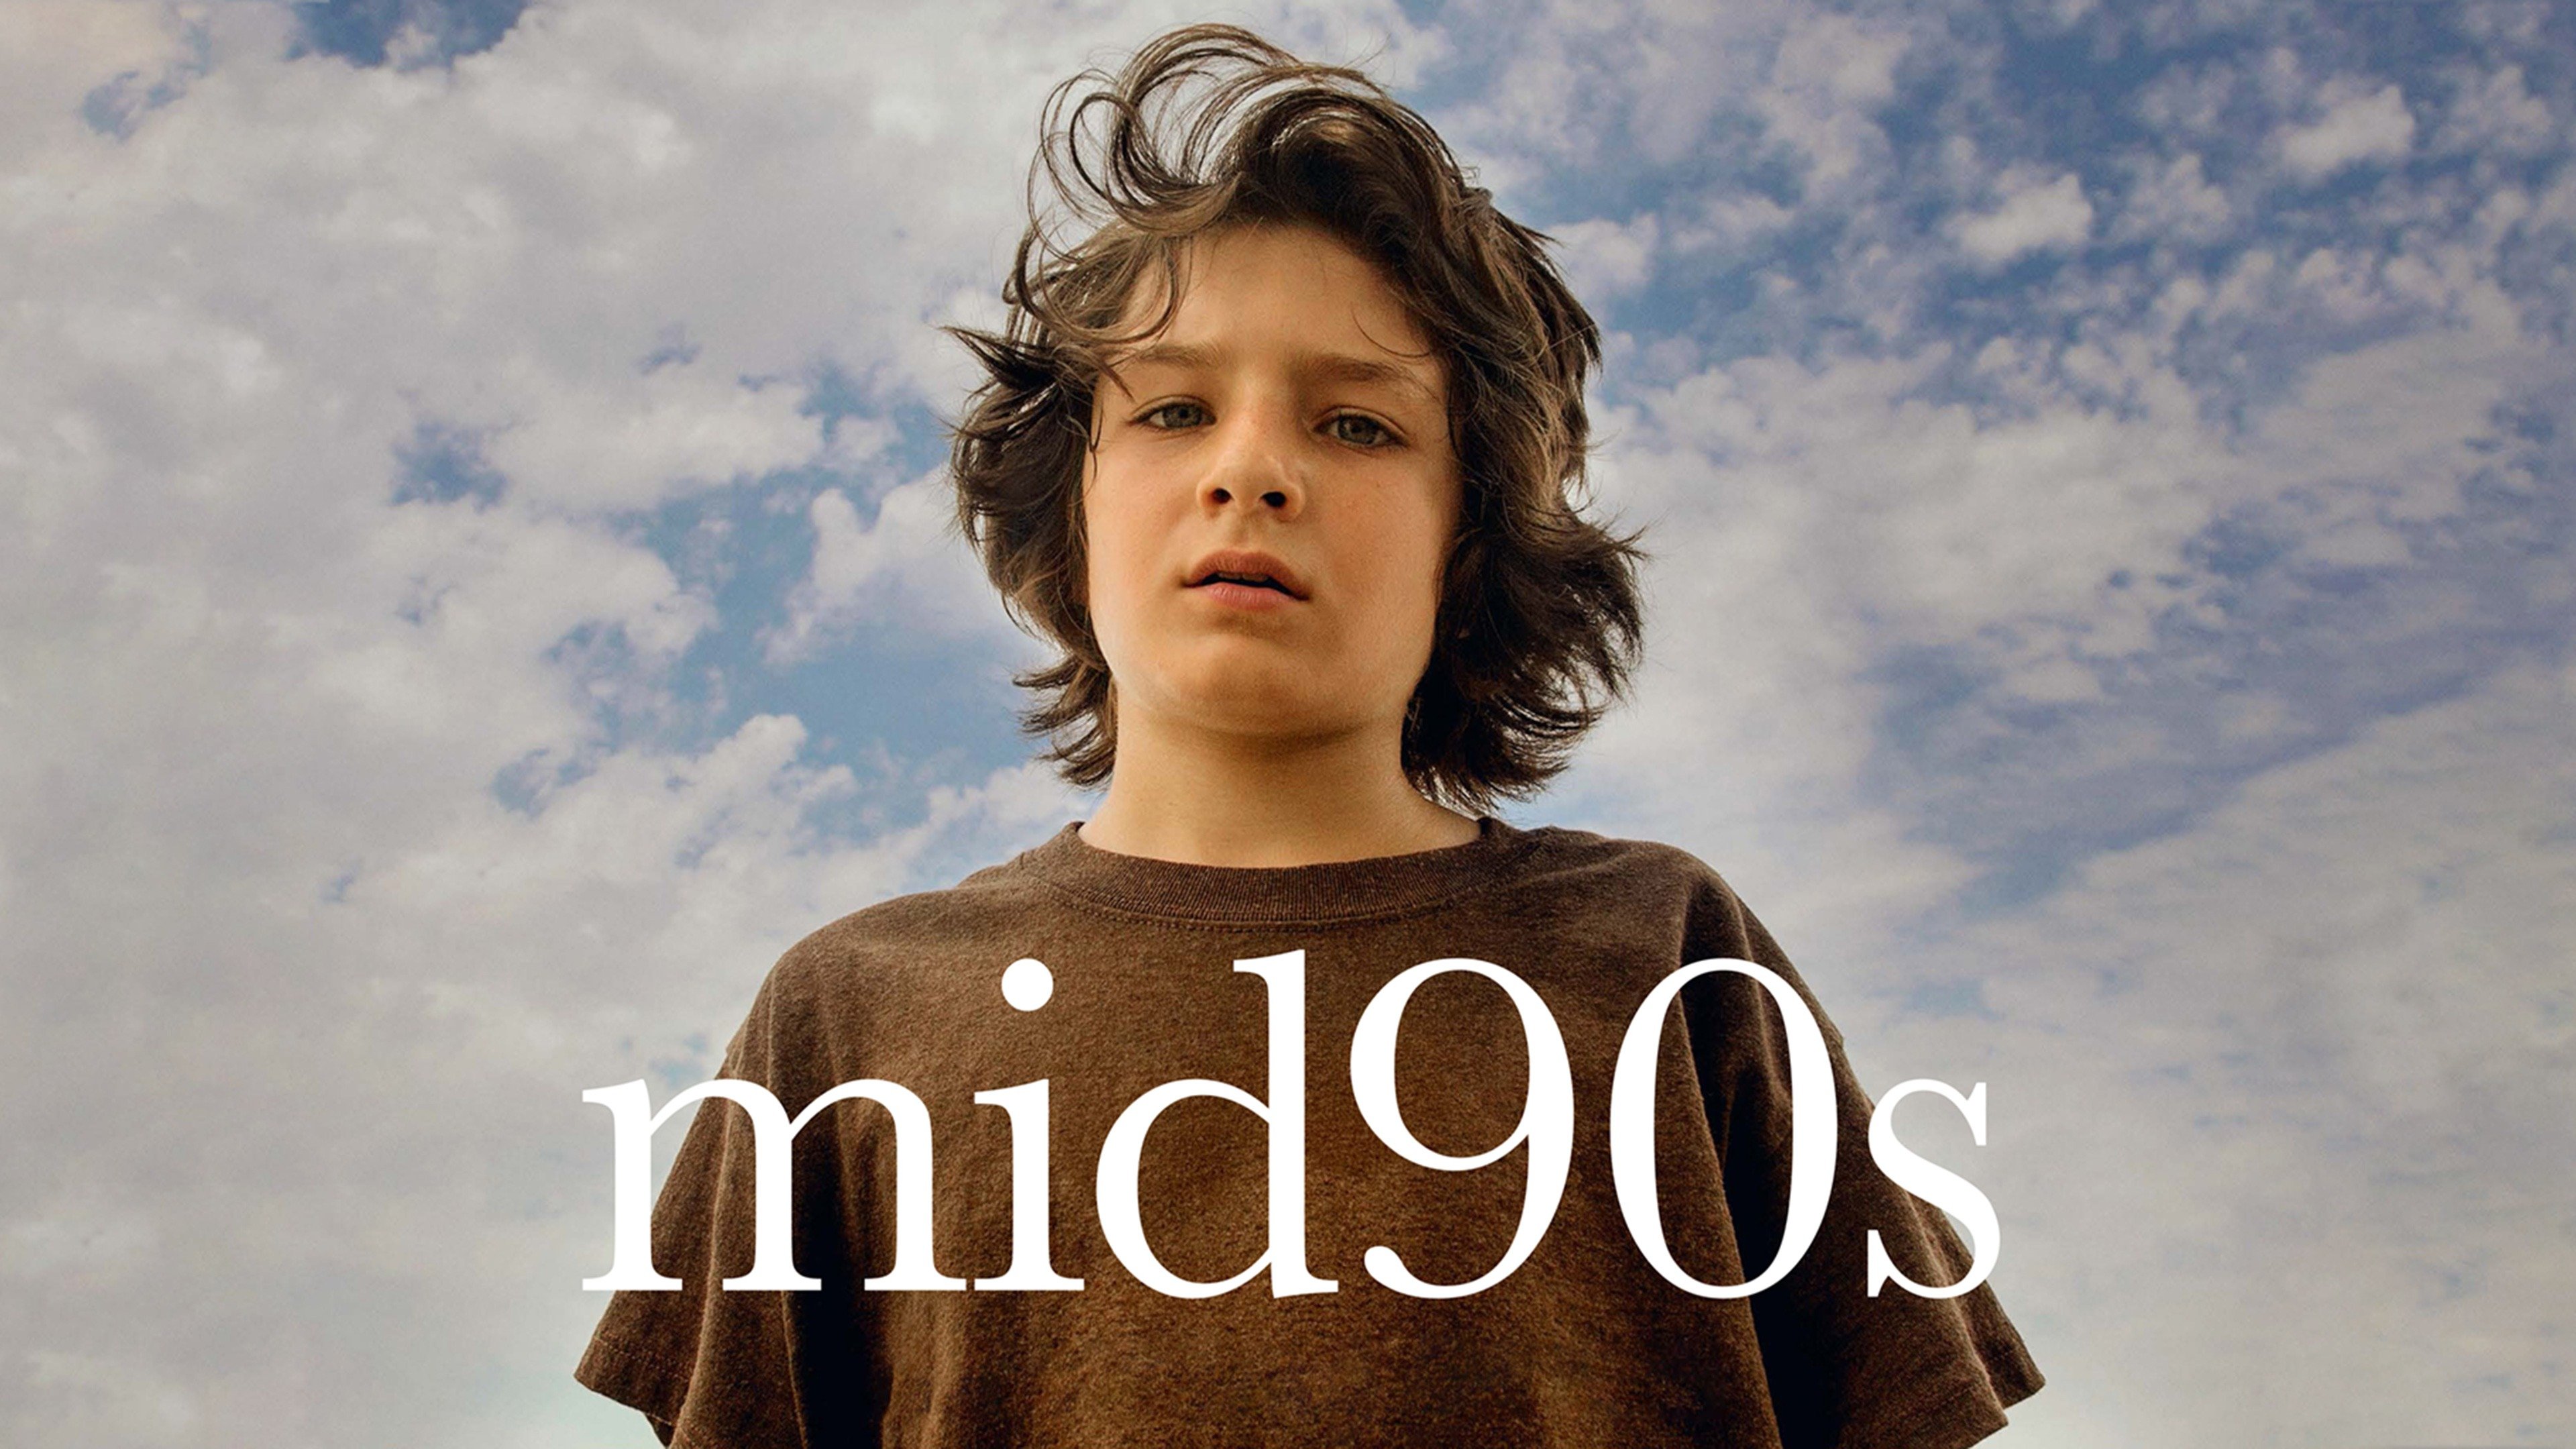 15 Best Movies Like 'Mid90s' You Need To Watch Next